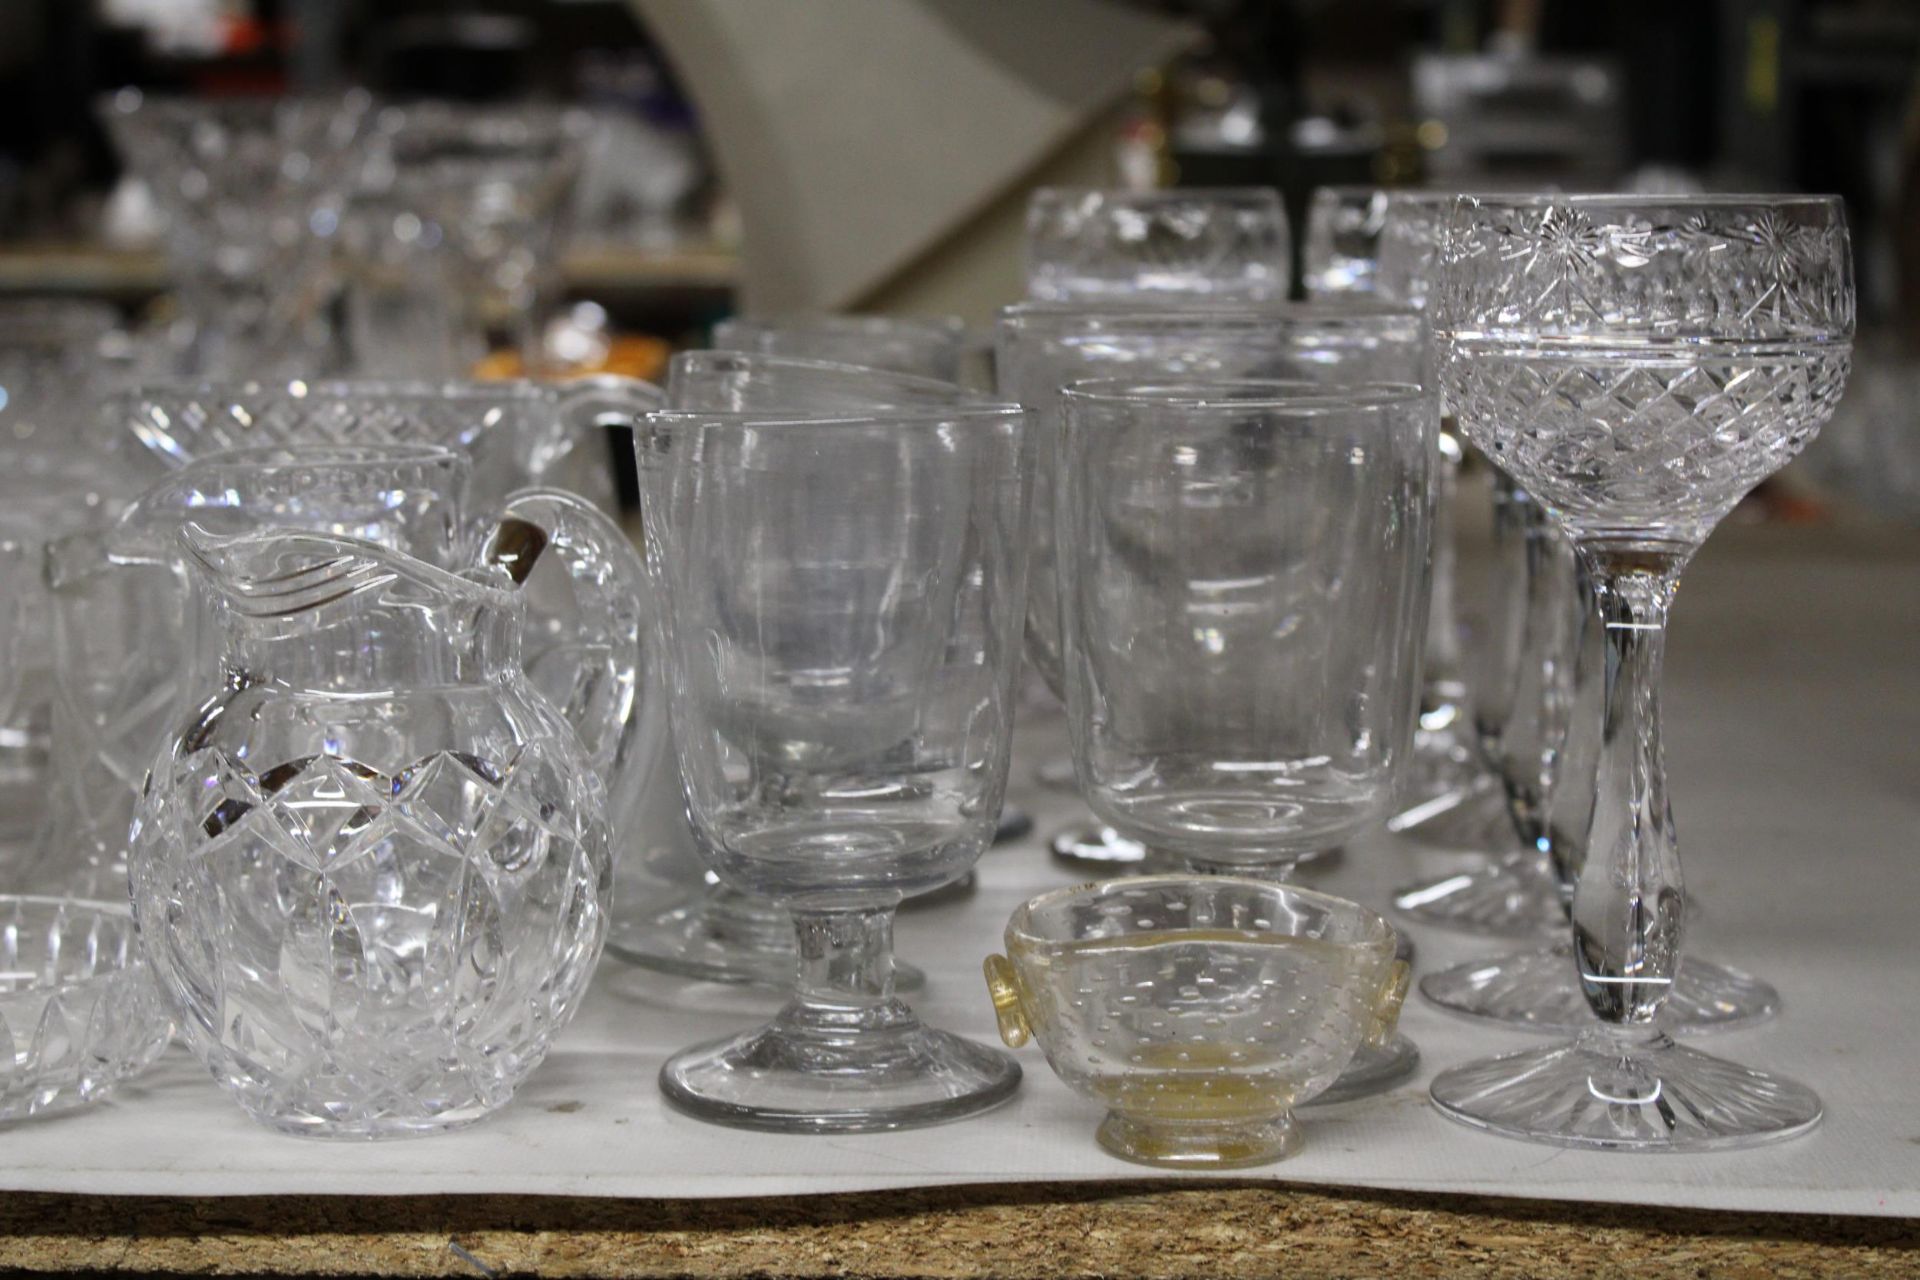 A LARGE COLLECTION OF GLASSWARE TO INCLUDE DESSERT DISHES, JUGS, WINE GLASSES ETC - Image 4 of 6